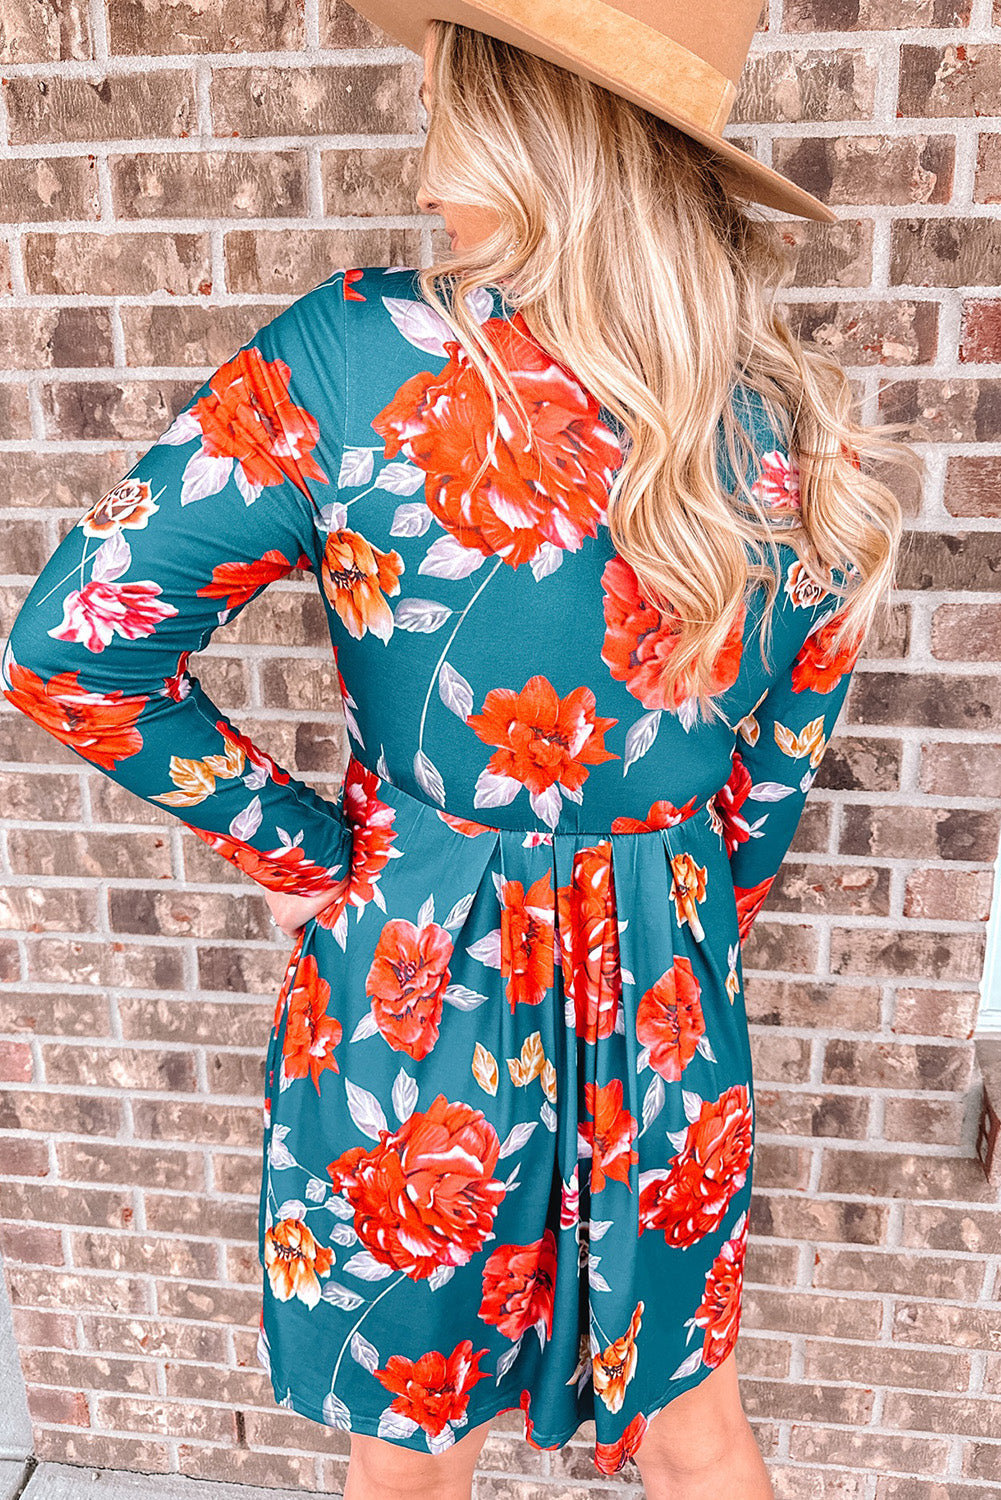 Blue Floral Pleated Long Sleeves Dress